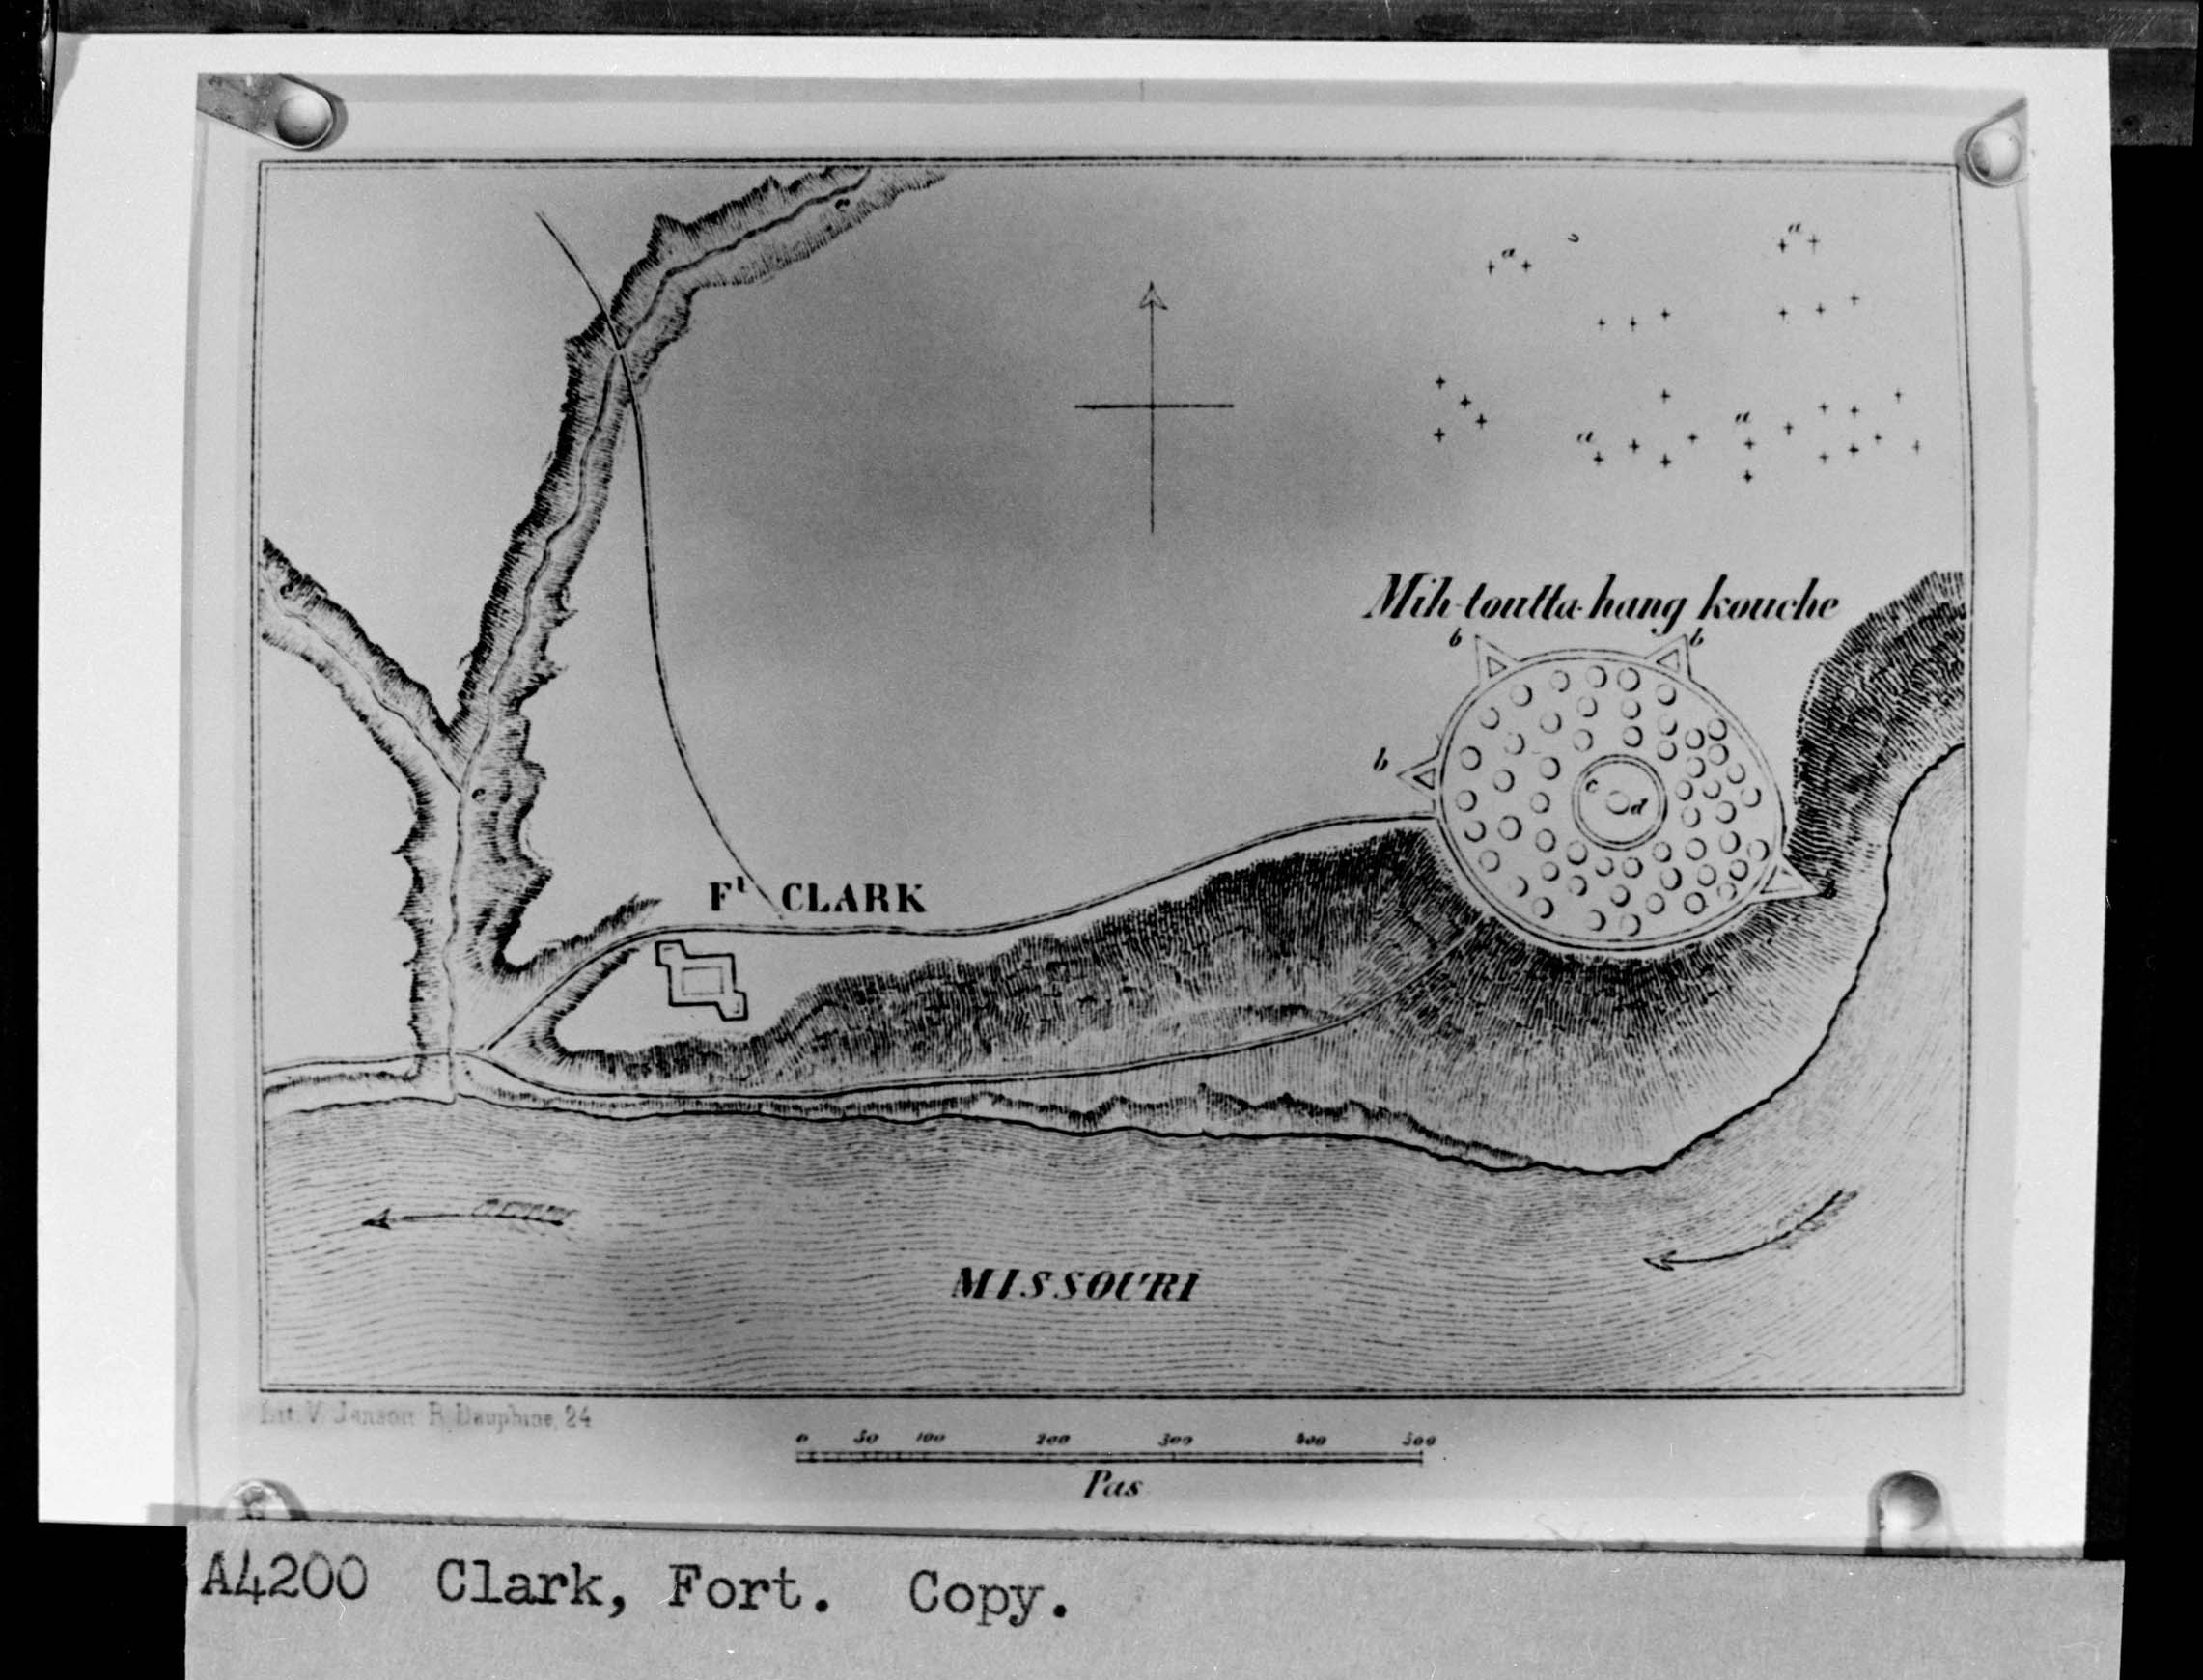 Map of Fort Clark and Mih-toutta-hang-kouche